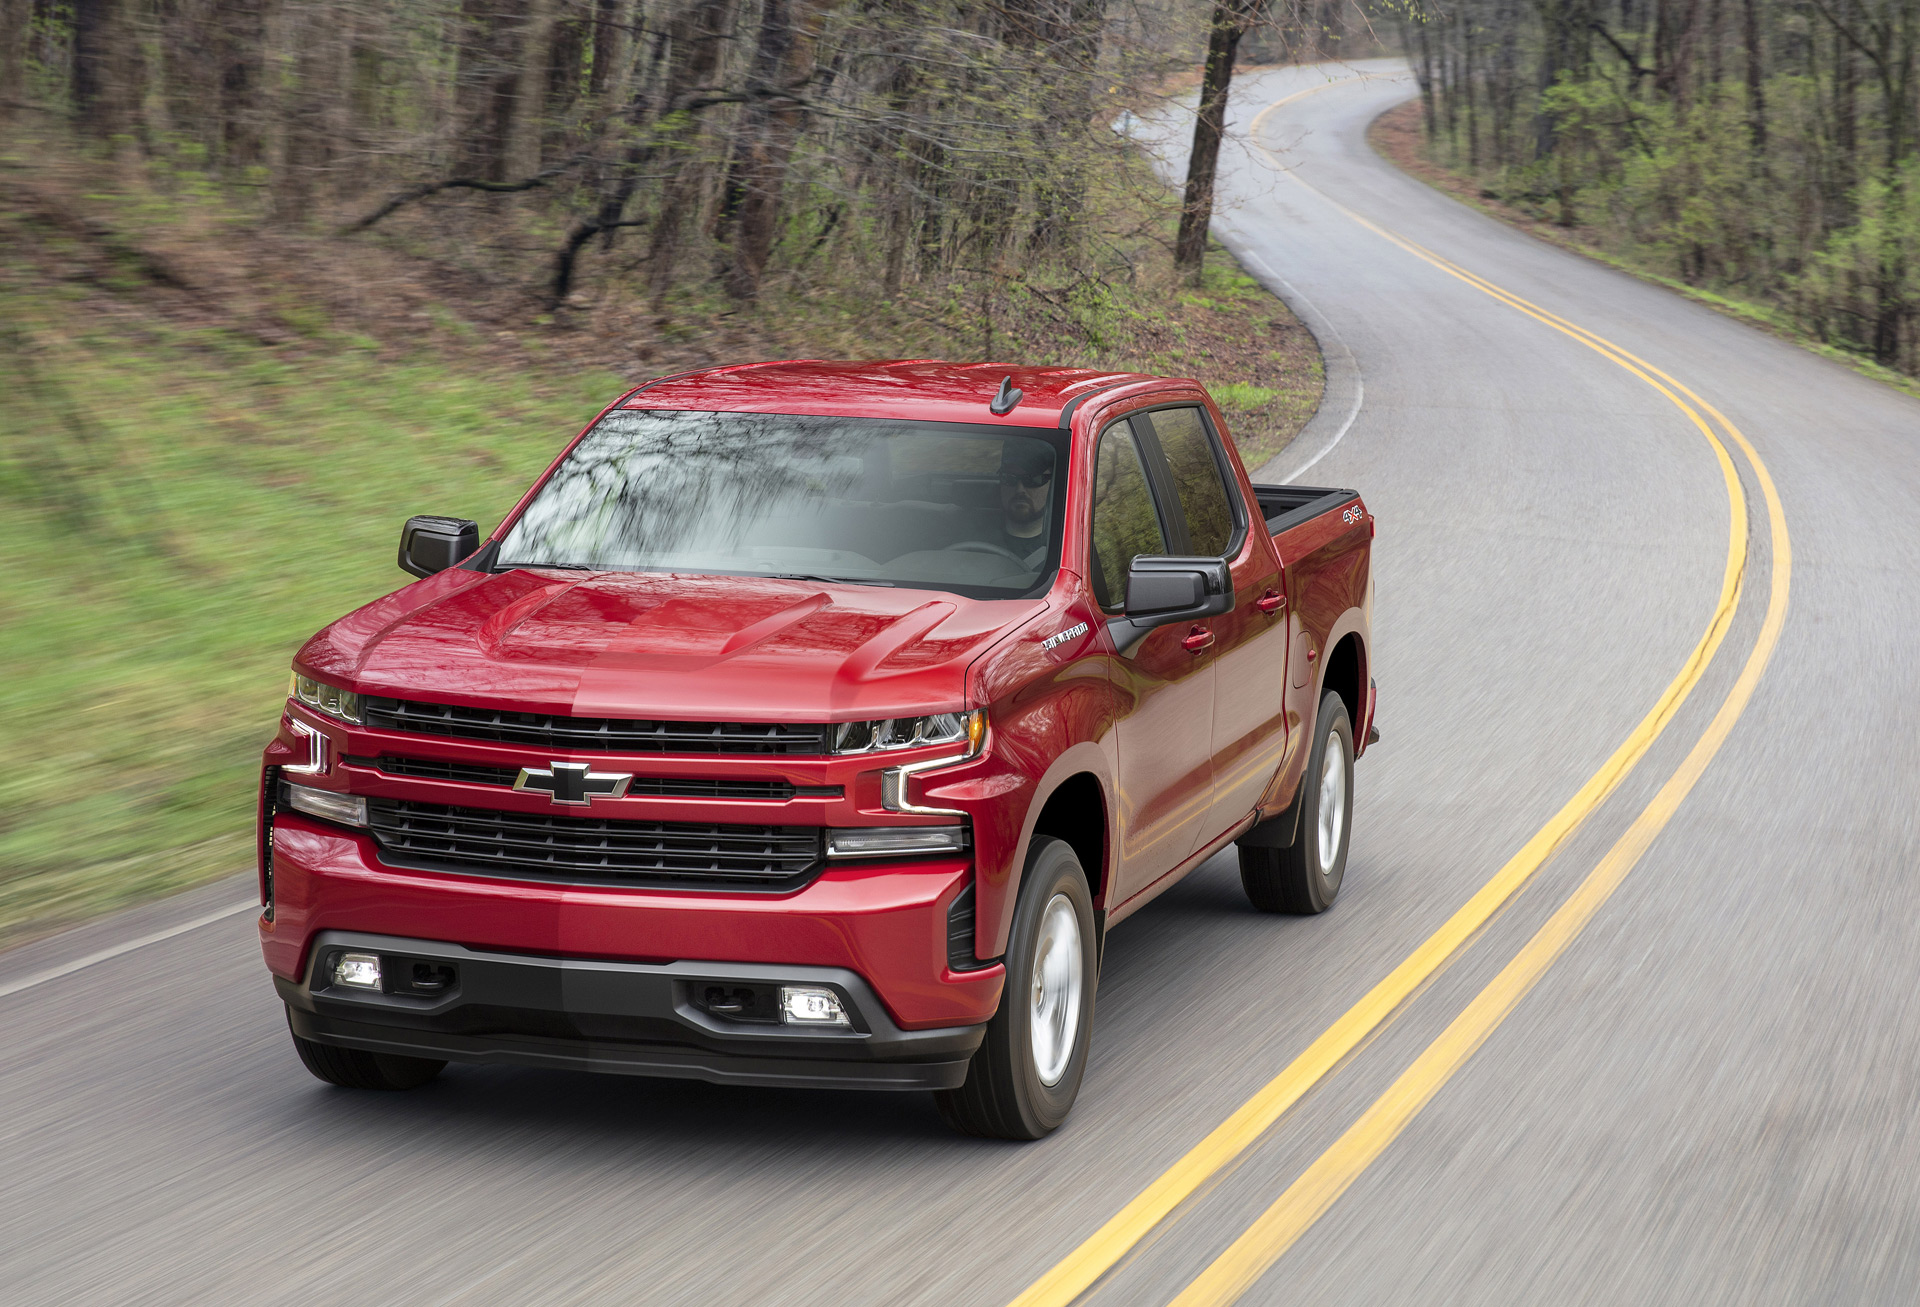 2019 Chevrolet Silverado pickup costs $31,290 to start, possibilities may  be endless